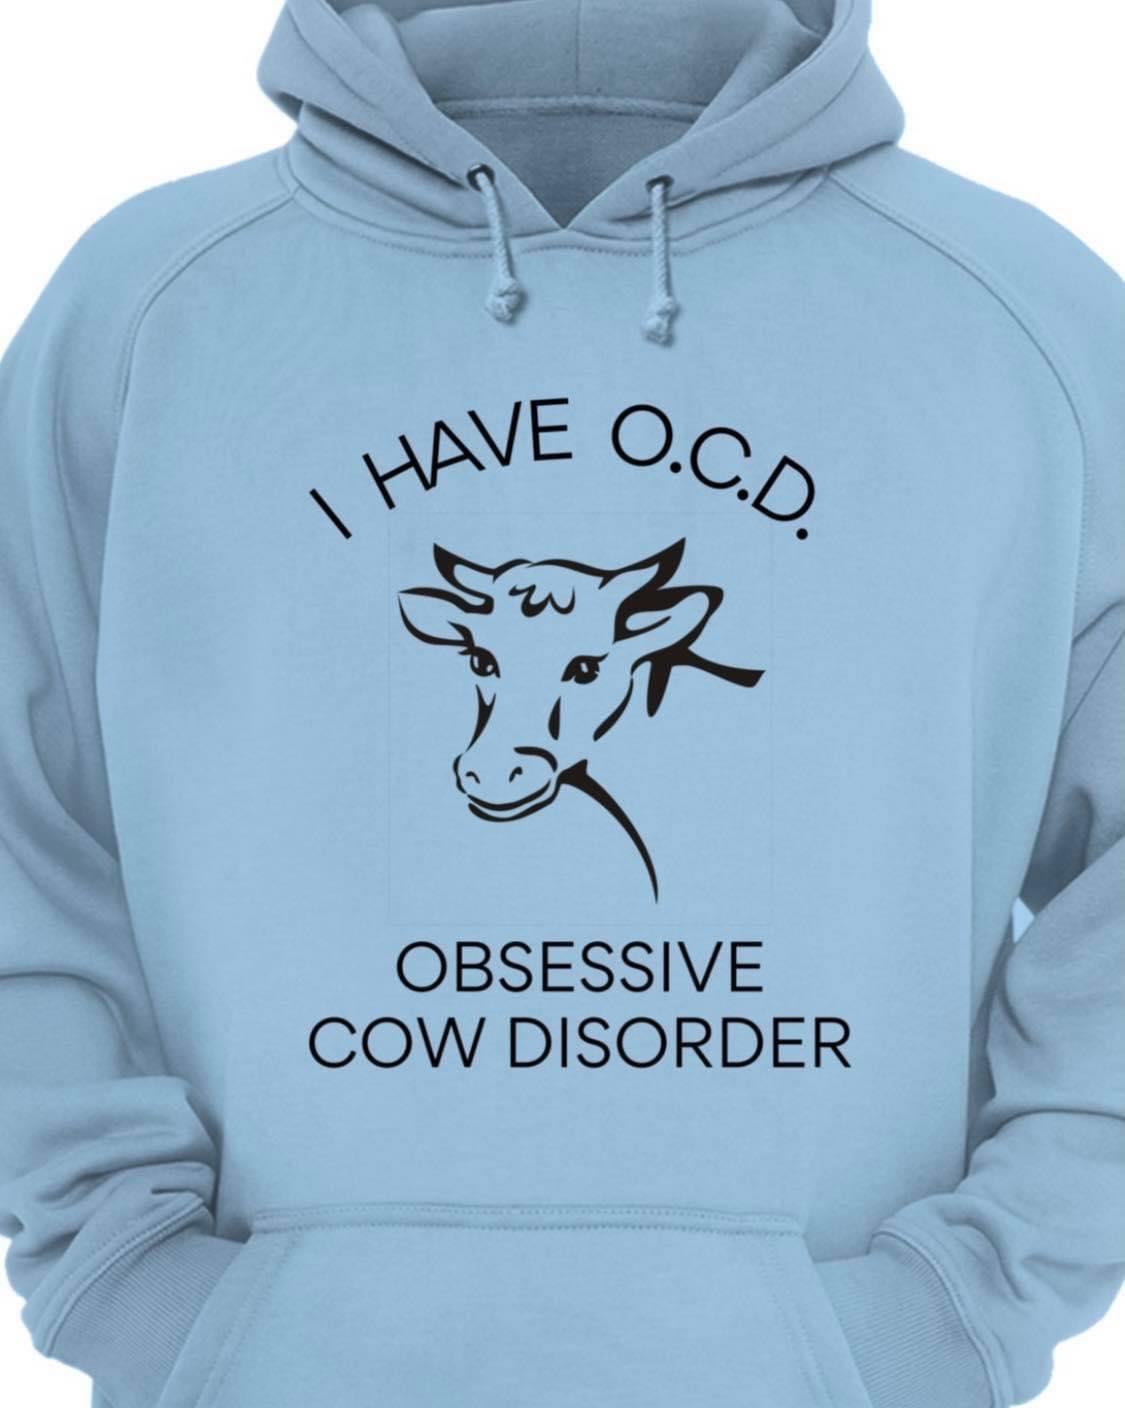 Obsessive Cow Disorder Shirt